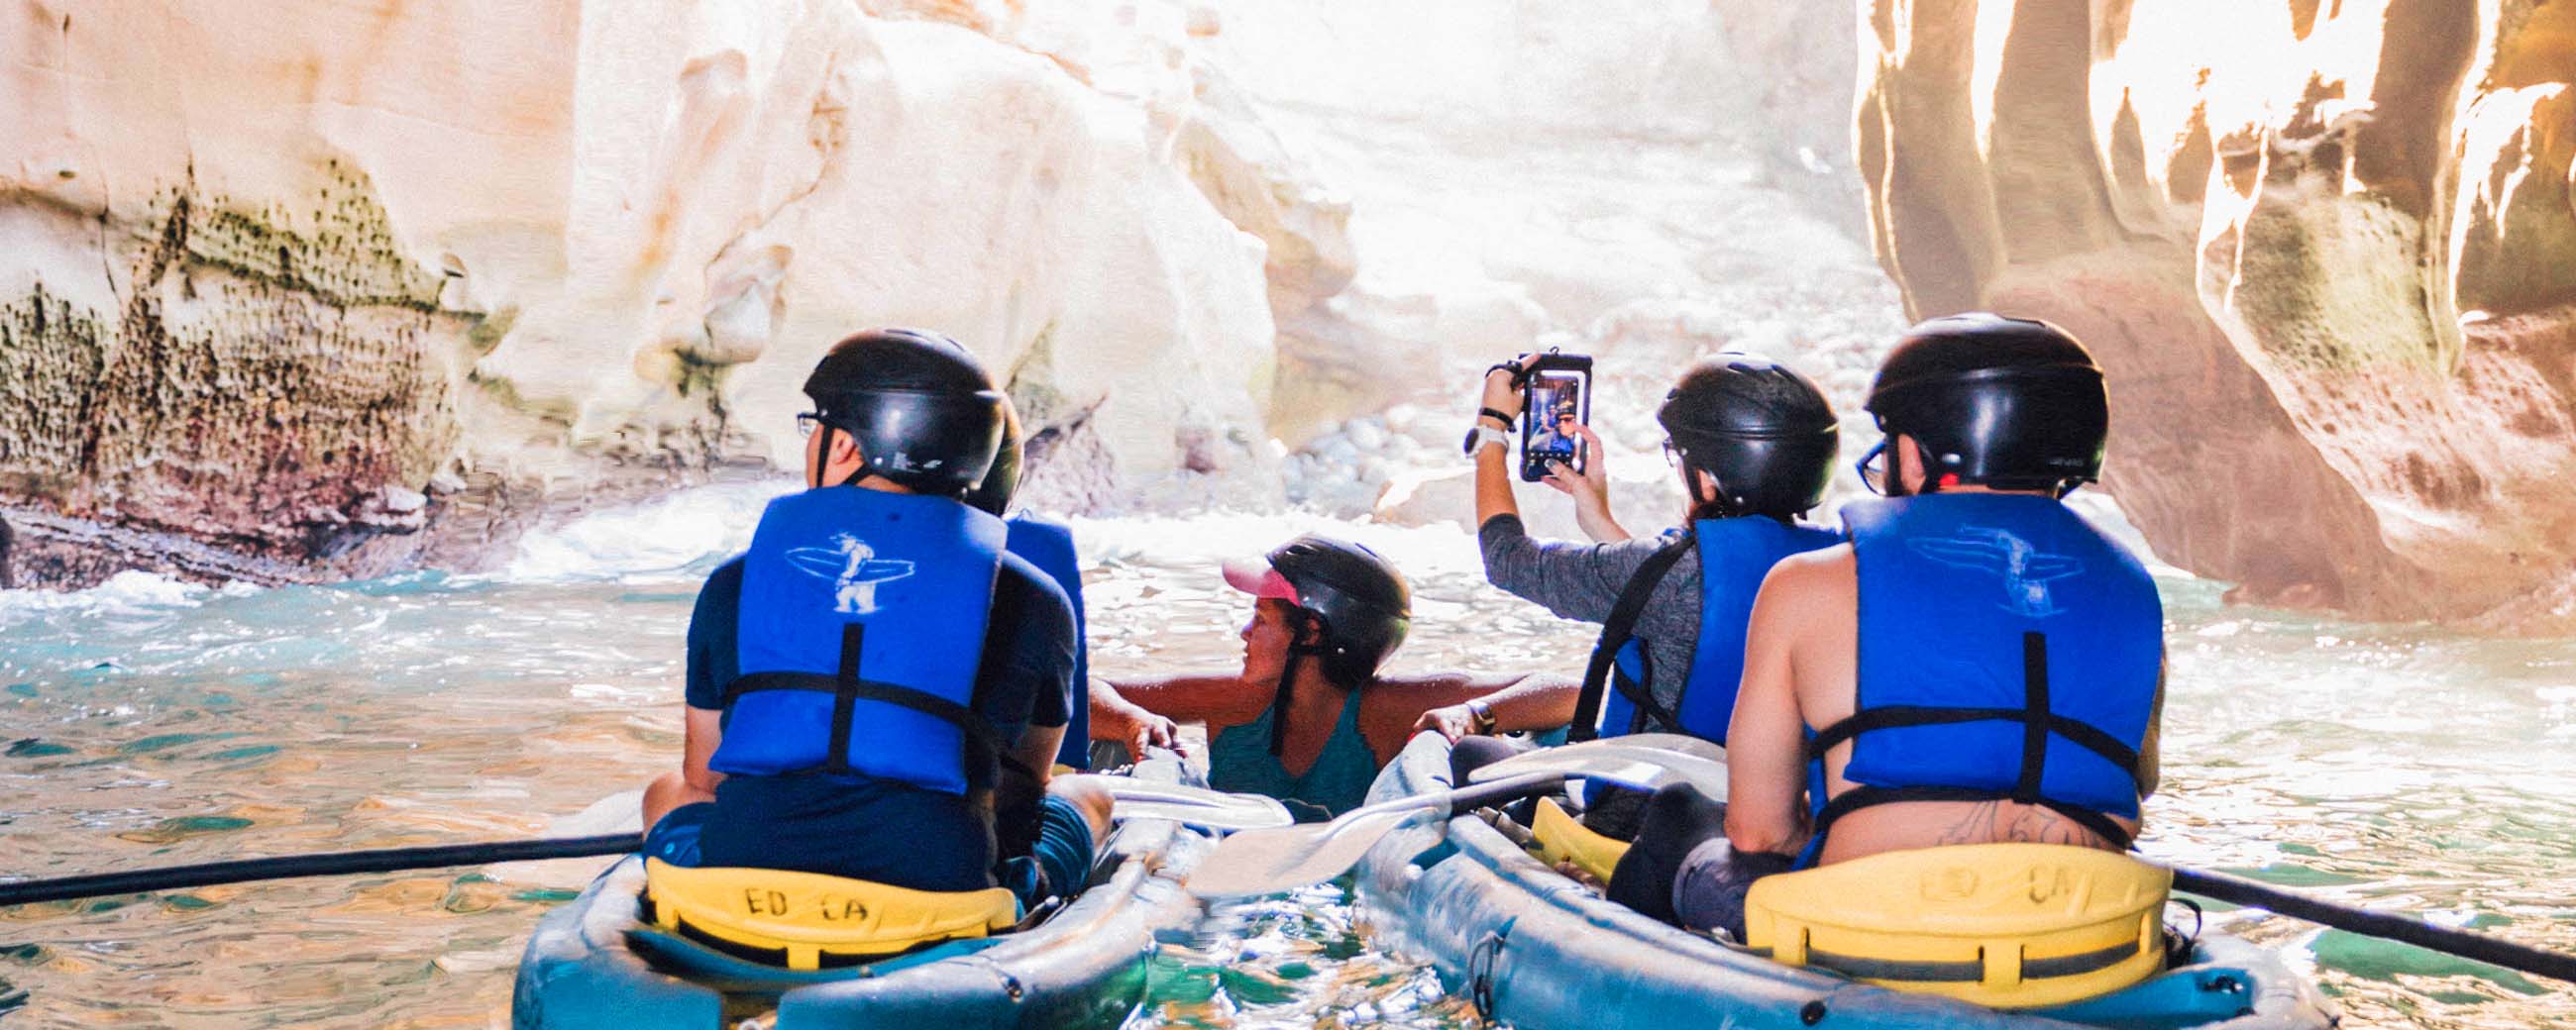 Kayaking tour through Seven Sea Caves in La Jolla, San Diego with Everyday California.